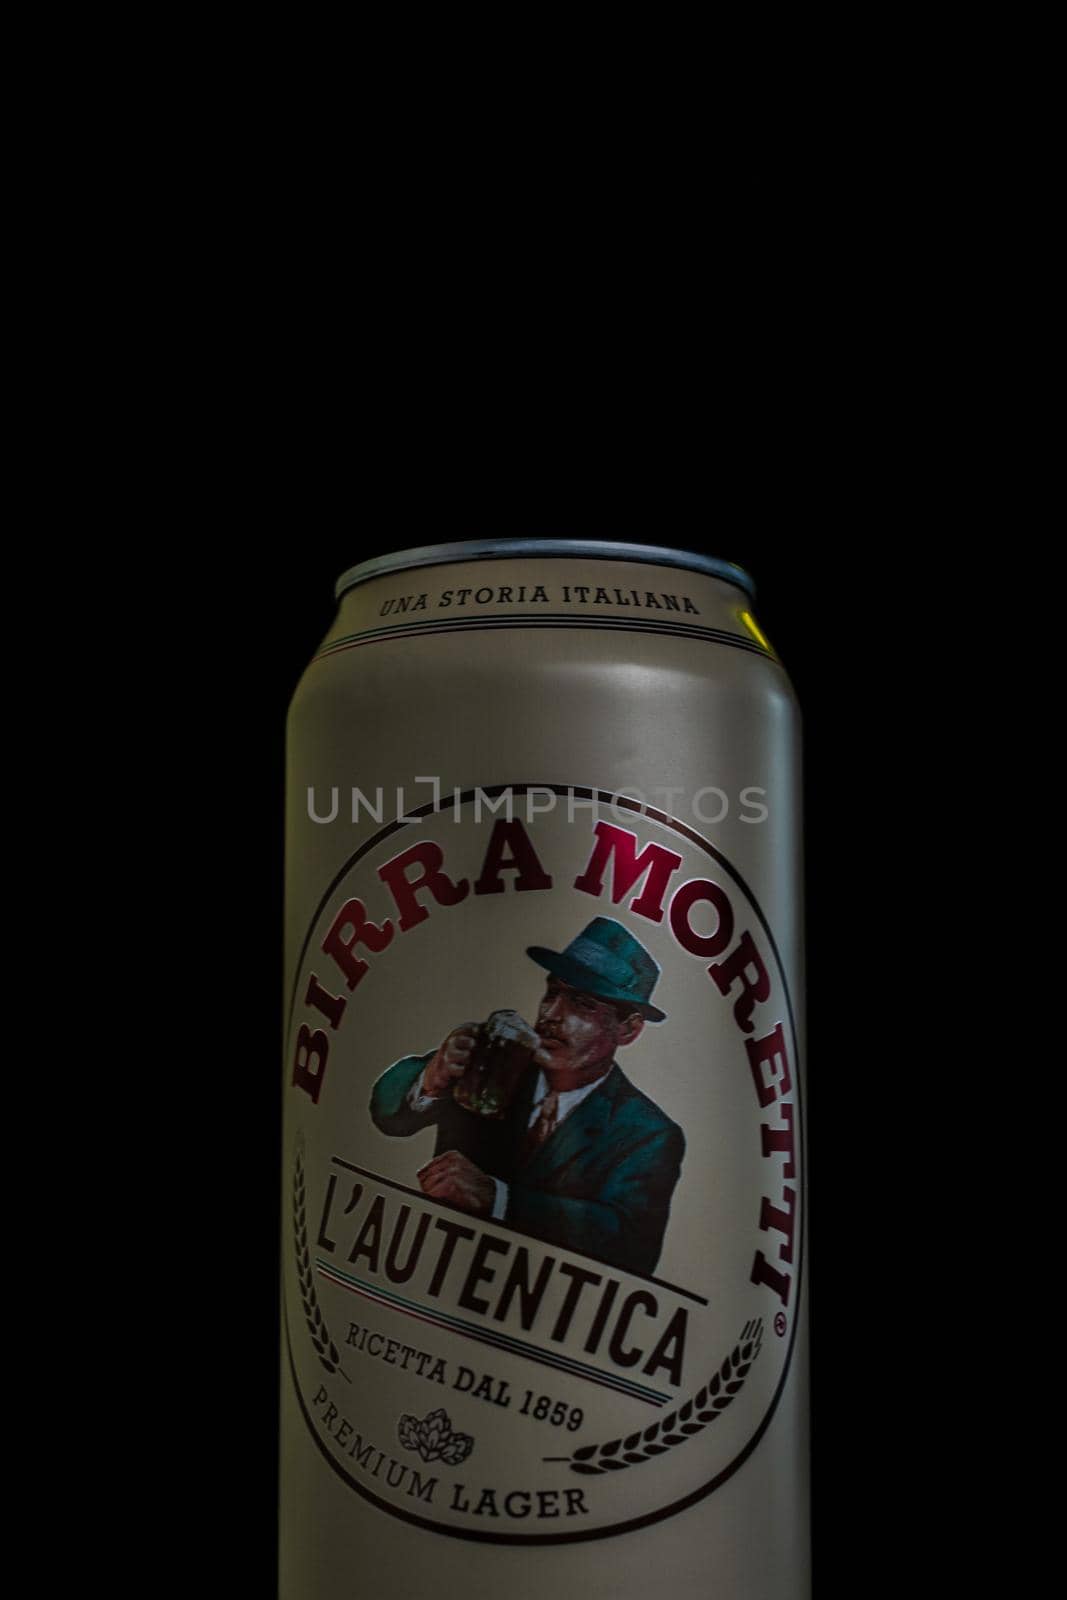 Birra Moretti, a premium lager beer produced by Italian brewing company now owned by Heineken International. Studio photo shoot in Bucharest, Romania, 2021